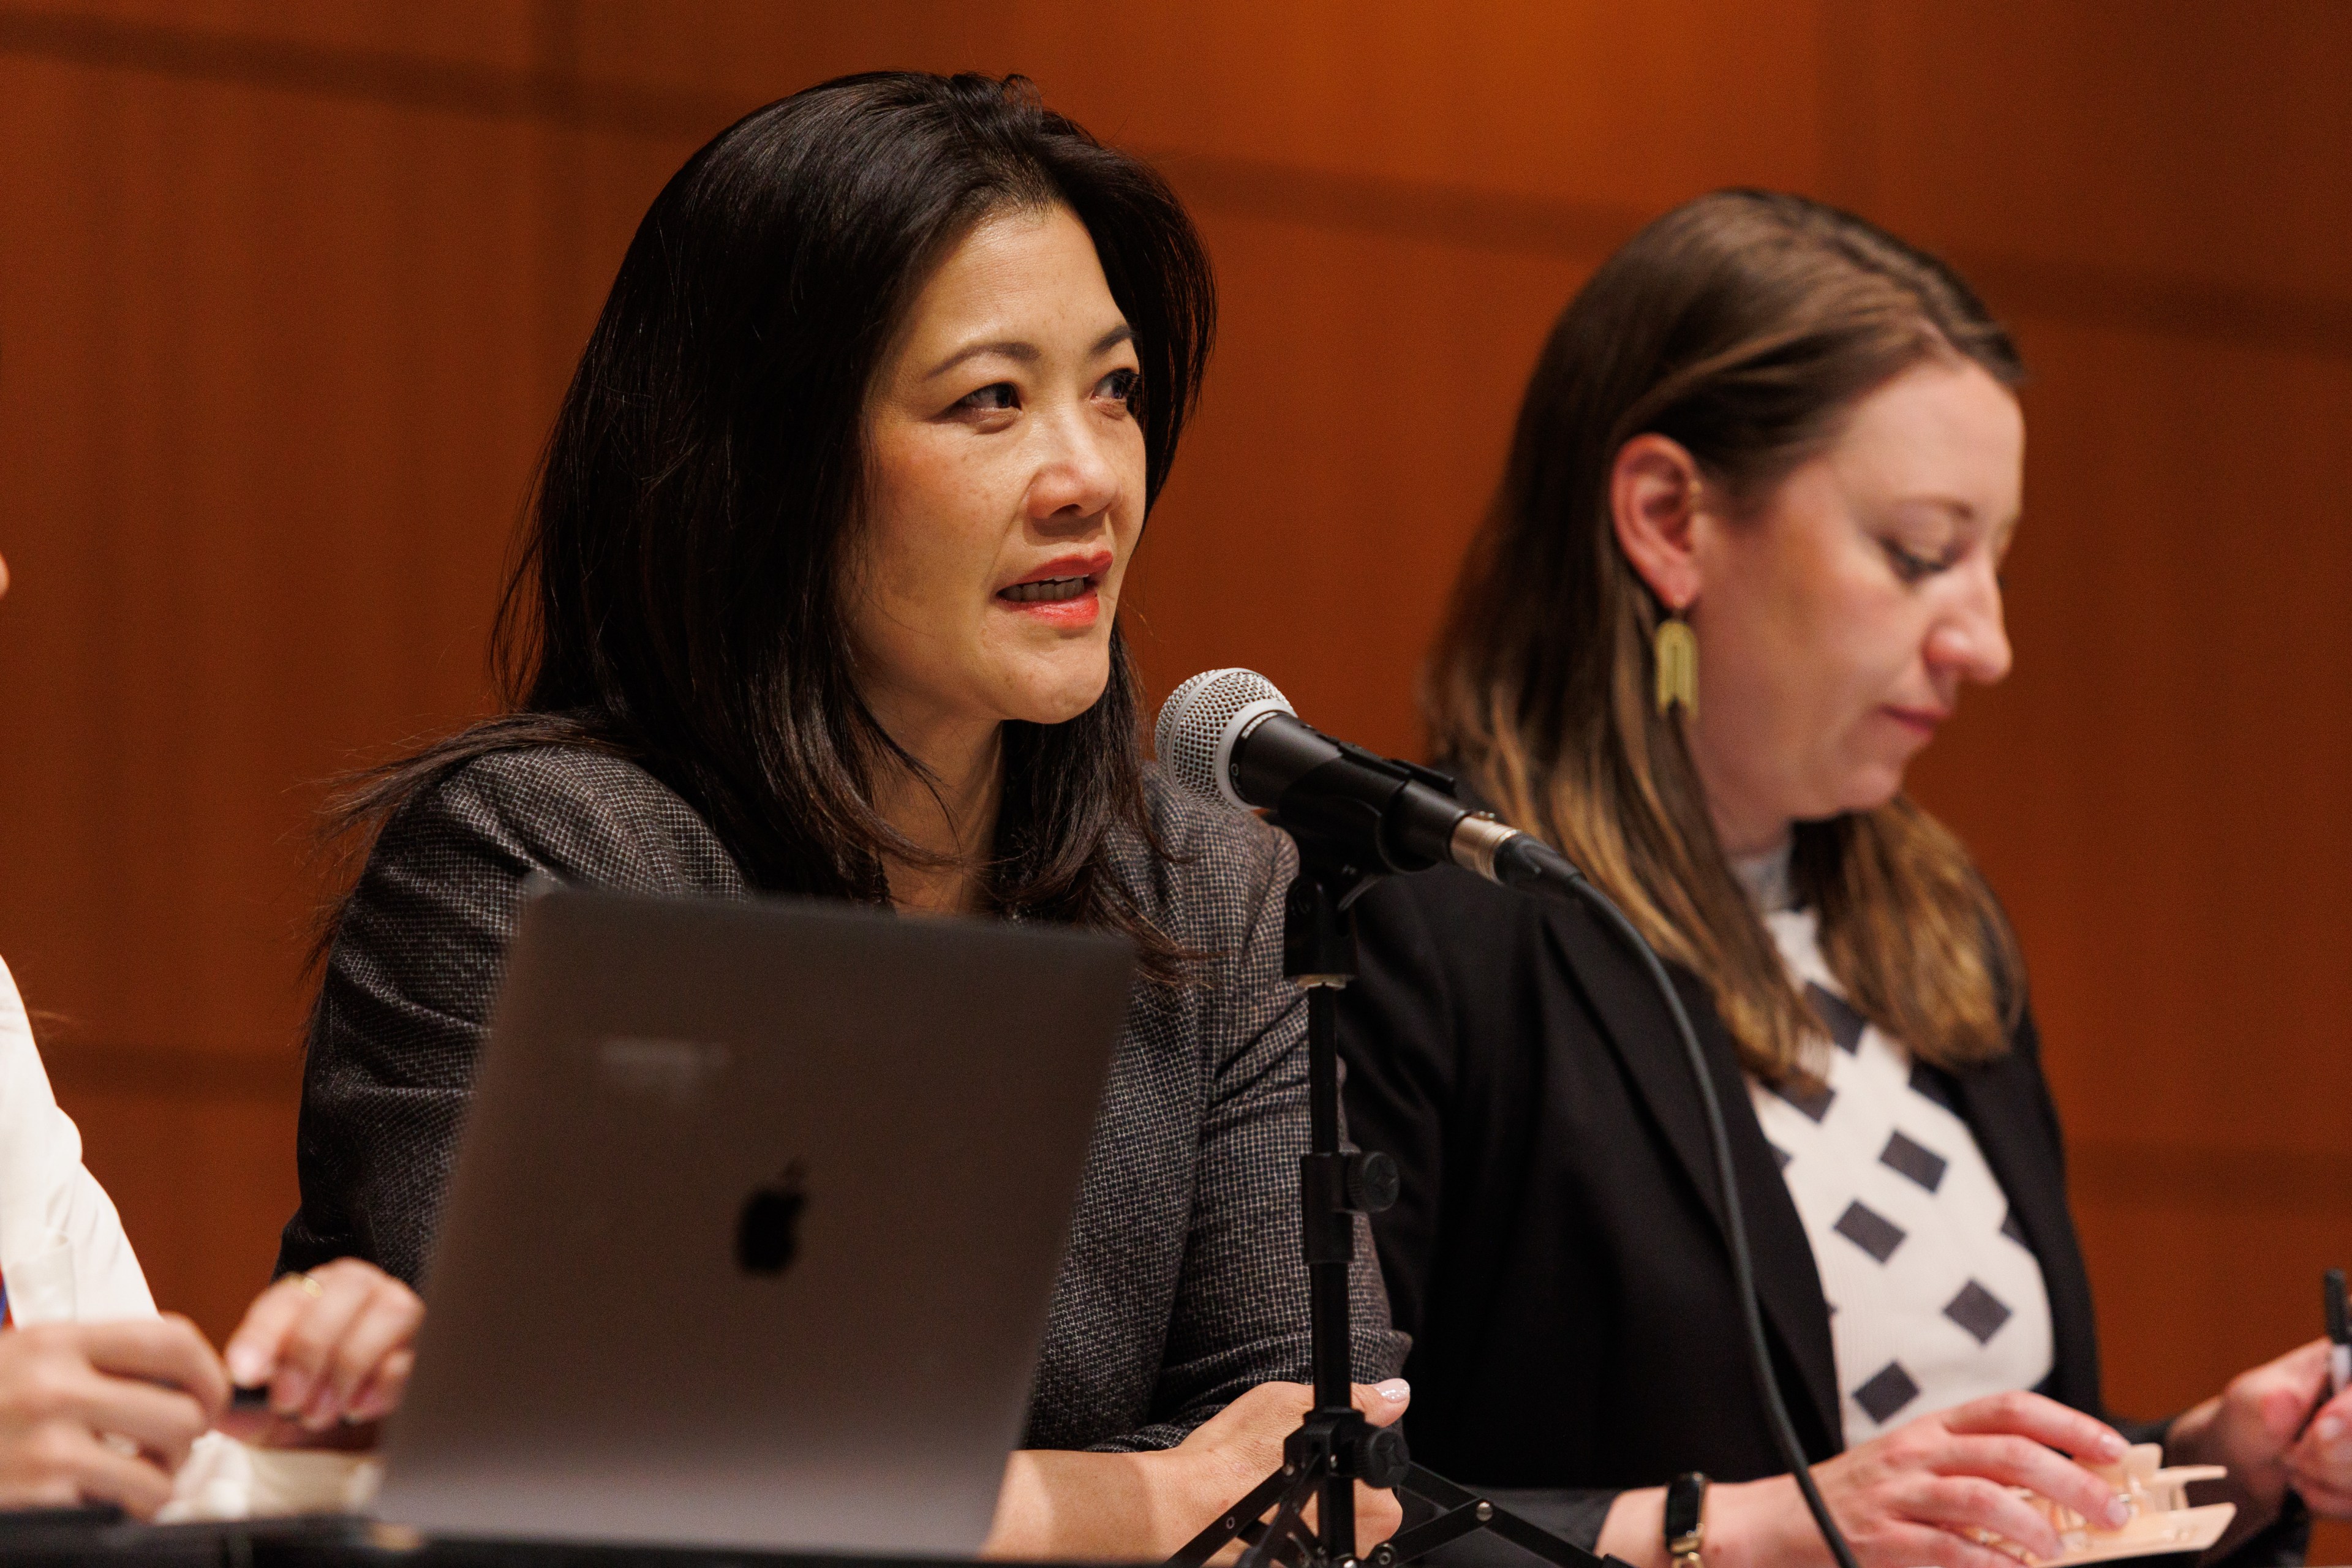 Two women on a panel, one speaking into a microphone, with a laptop in front of them.